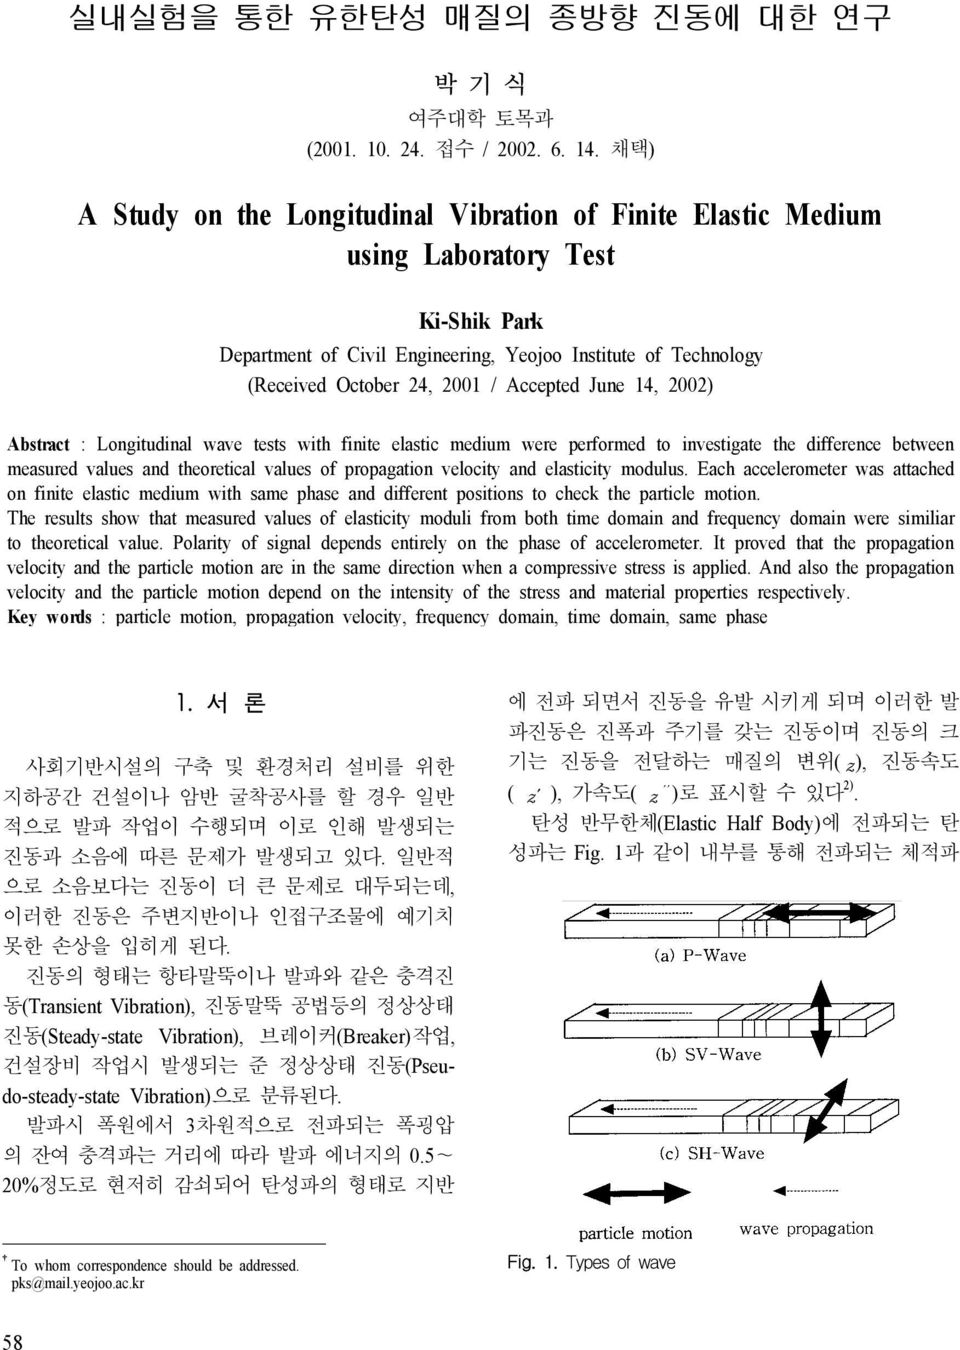 Accepted June 14, 2002) Abstract : Longitudinal wave tests with finite elastic medium were performed to investigate the difference between measured values and theoretical values of propagation